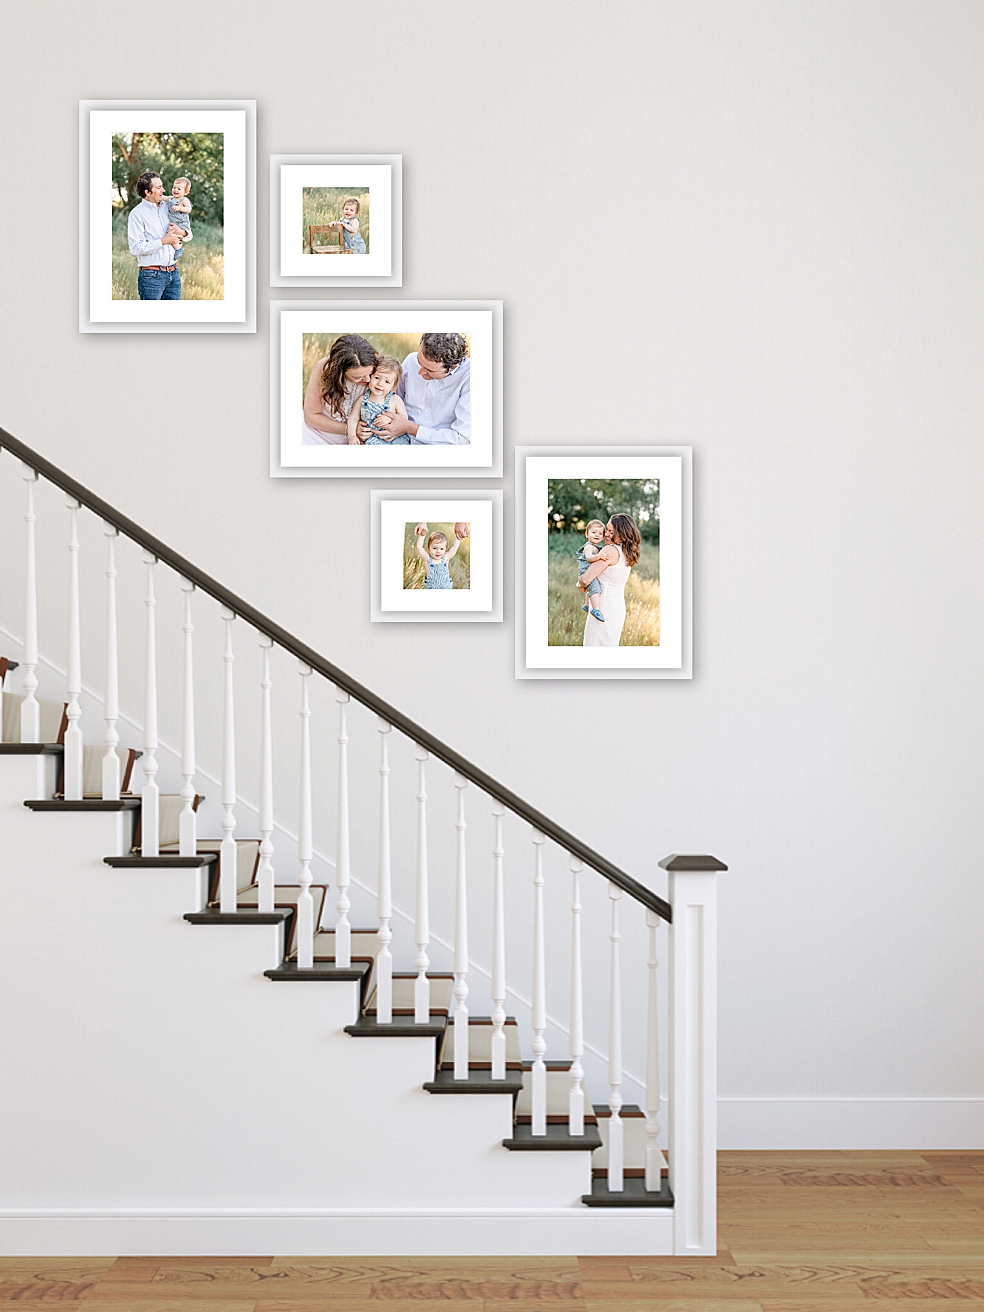 Example gallery wall in a stairway | Madison Alabama Full Service Photographer Jessica Lee 